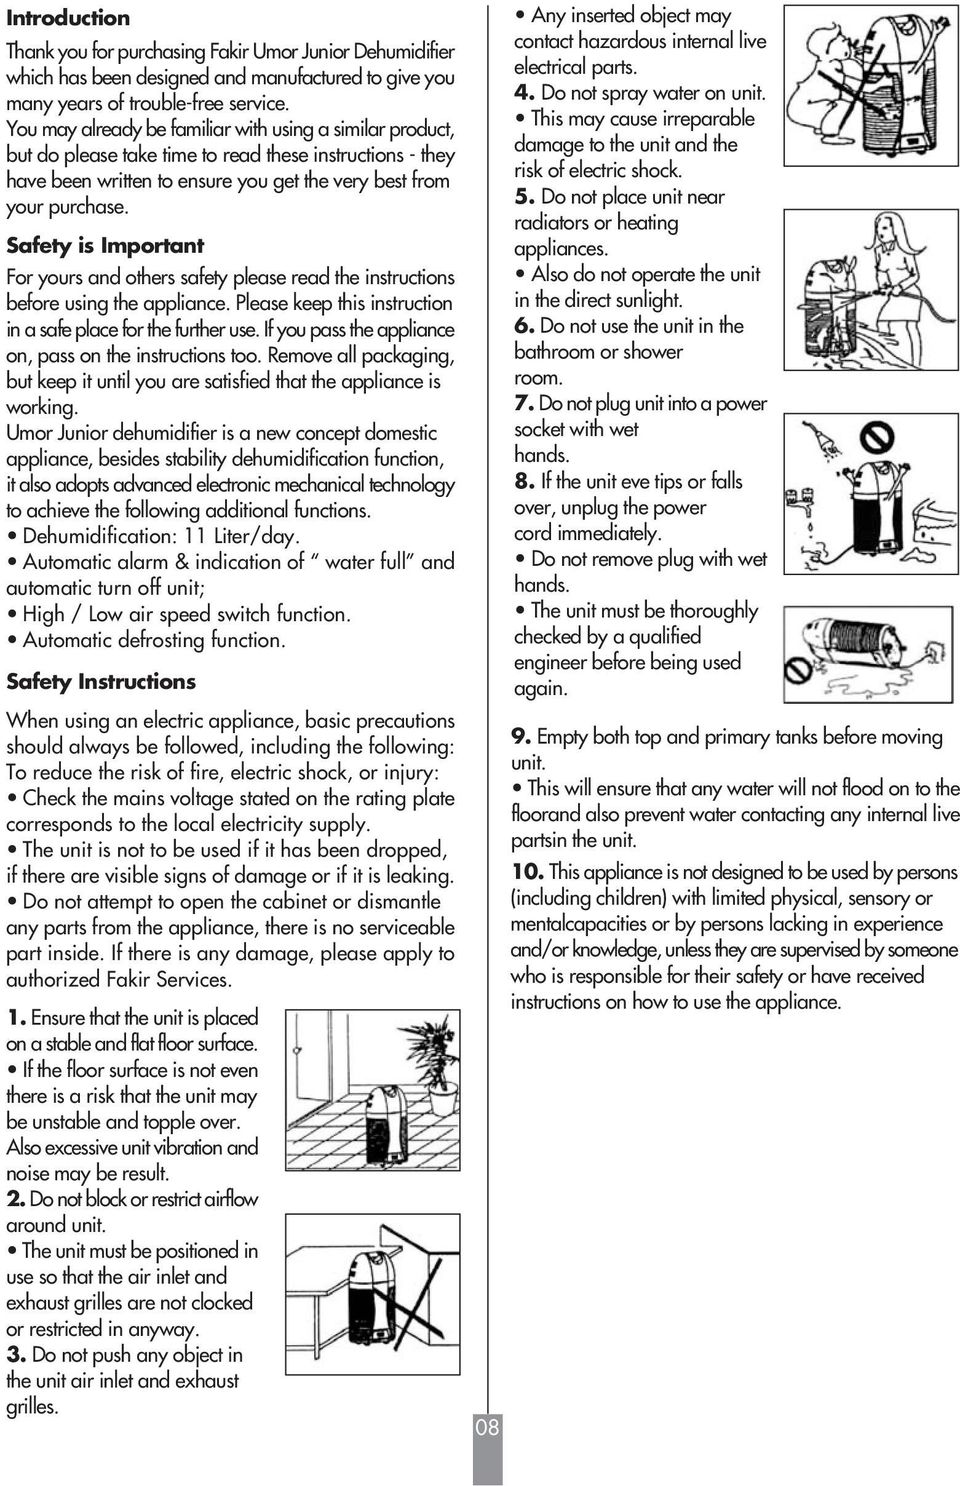 Safety is Important For yours and others safety please read the instructions before using the appliance. Please keep this instruction in a safe place for the further use.